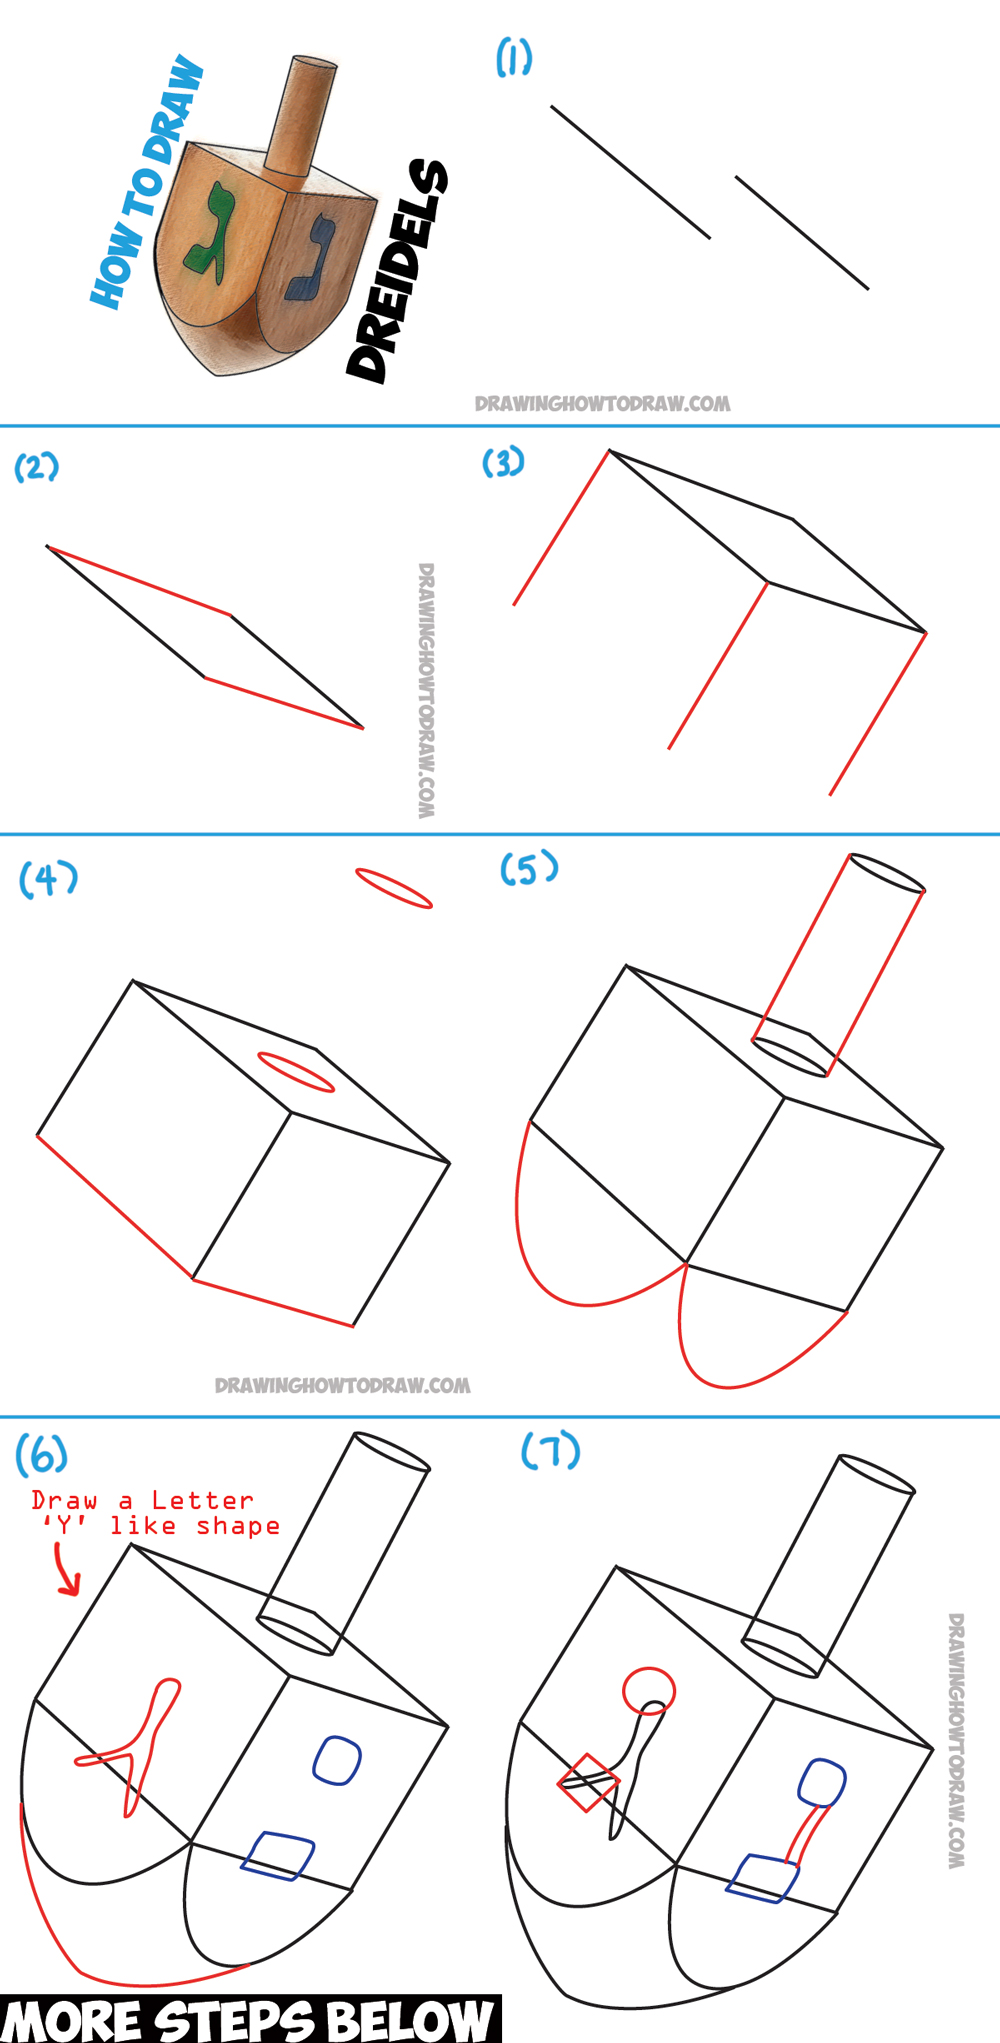 How to Draw a Dreidel for Hanukkah (Chanukah) Easy Step by Step Drawing